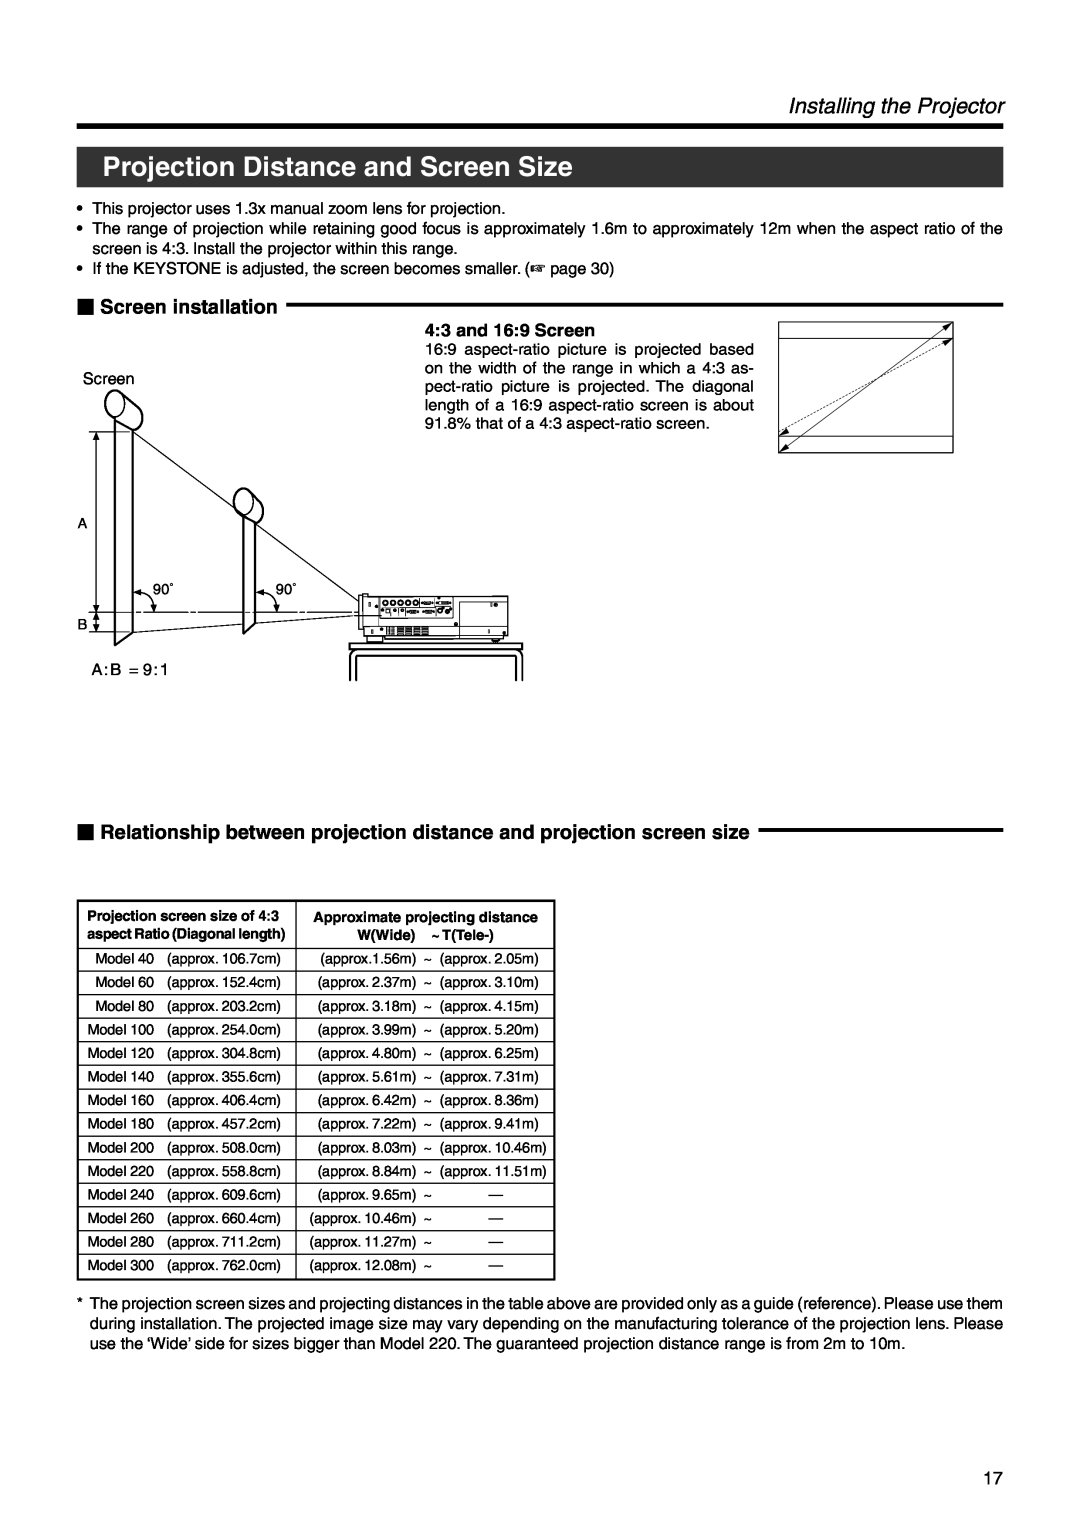 Dukane 28A9017 Projection Distance and Screen Size, Installing the Projector,  Screen installation, and 169 Screen, WWide 